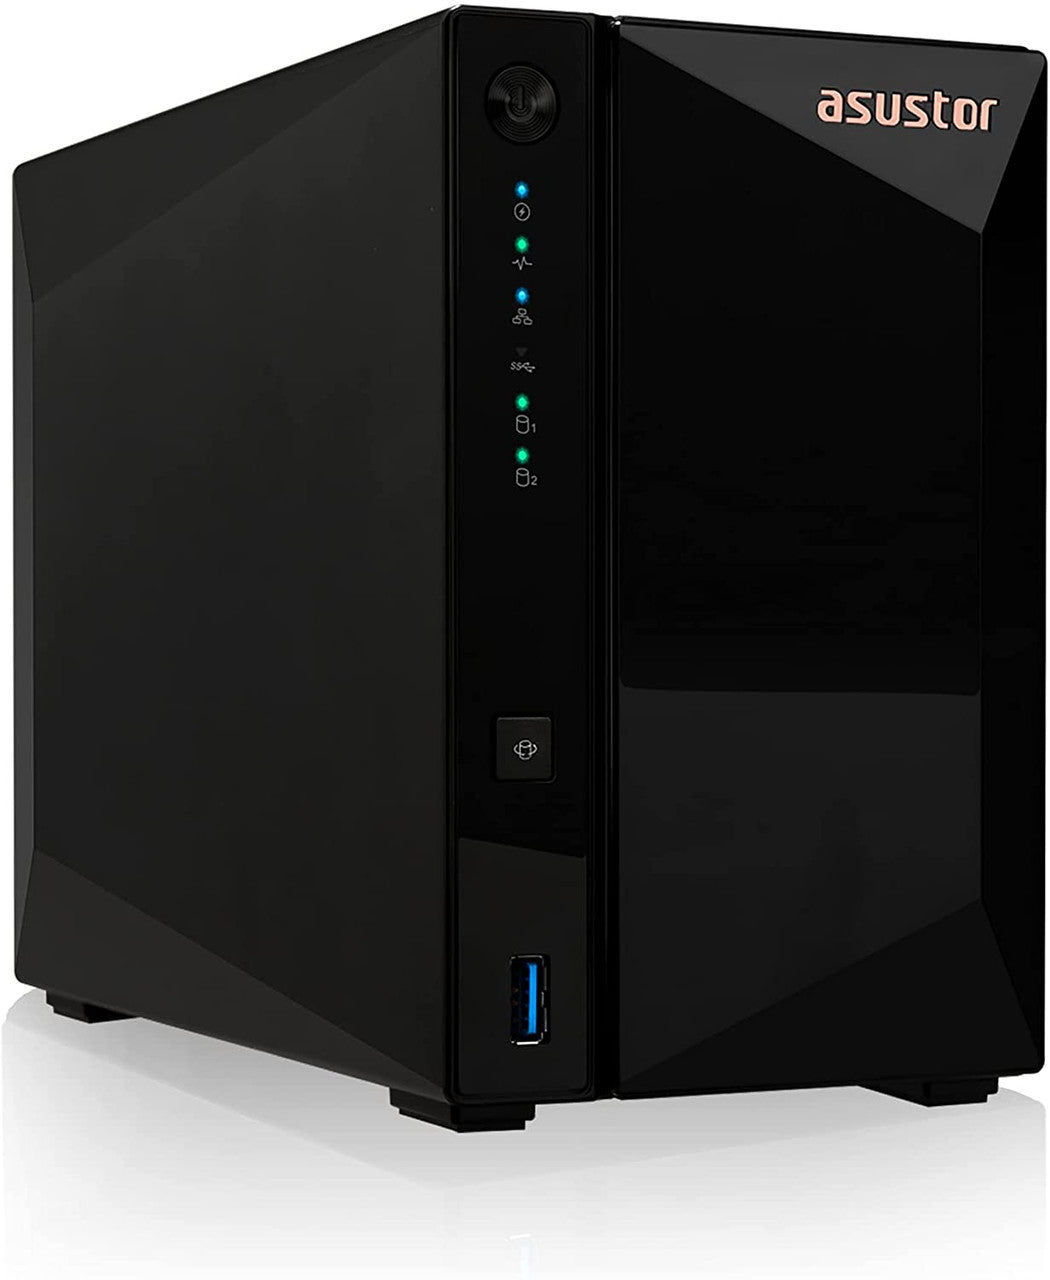 Asustor AS3302T 2-Bay Drivestor 2 PRO NAS with 2GB RAM and 24TB (2x12TB) Western Digital RED Plus Drives Fully Assembled and Tested